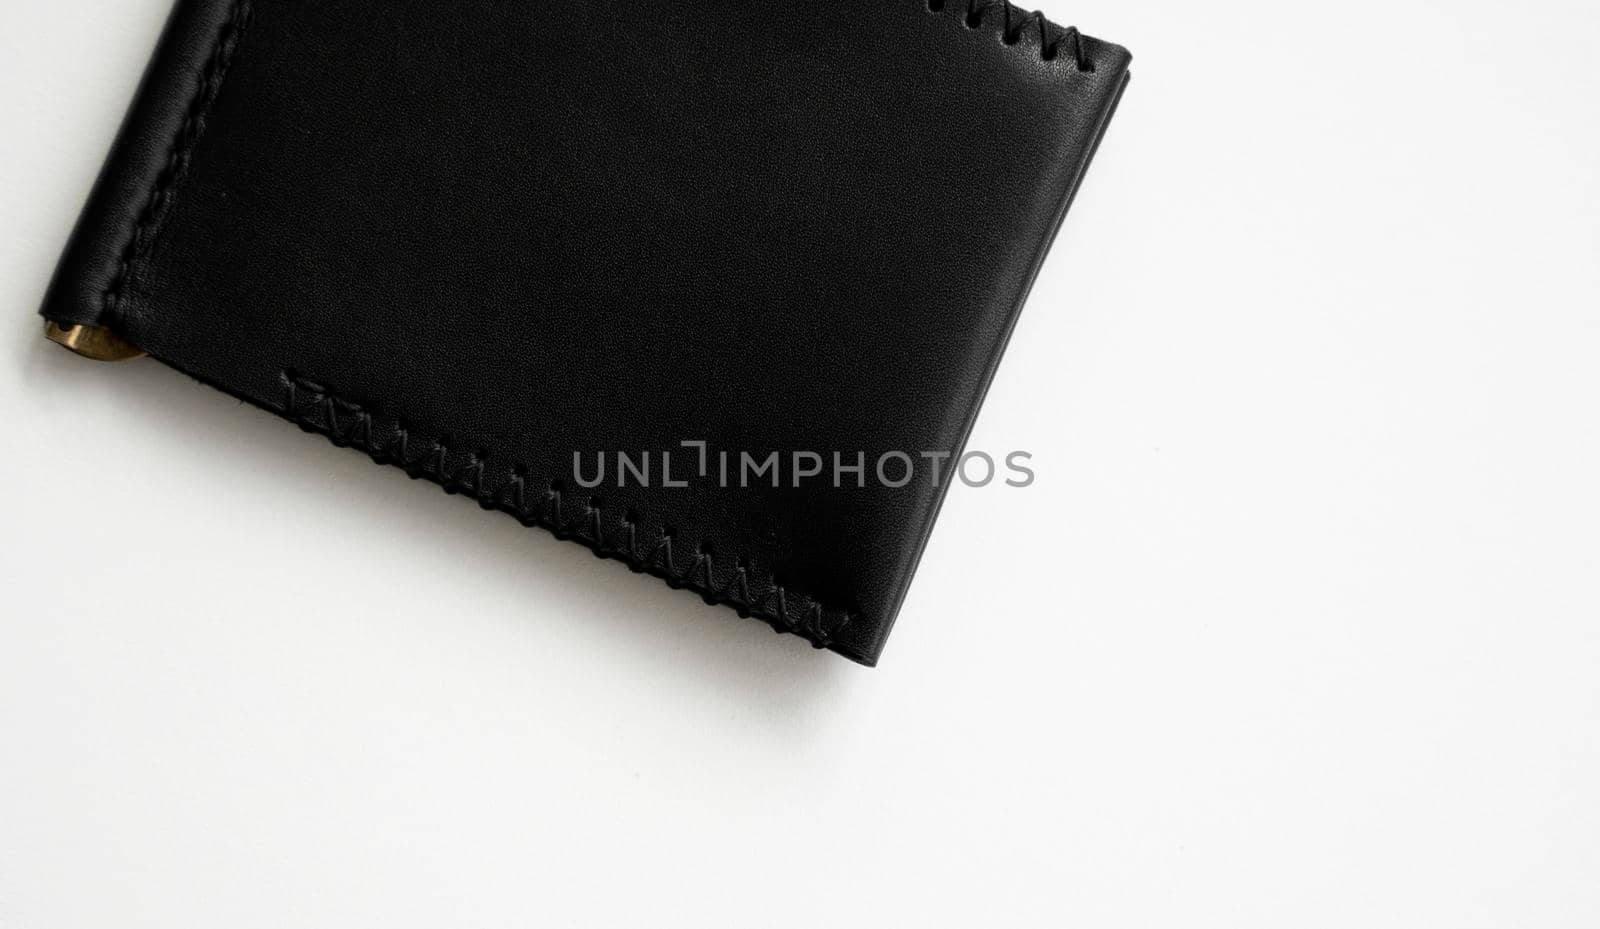 Black money clip handmade from genuine leather on white surface